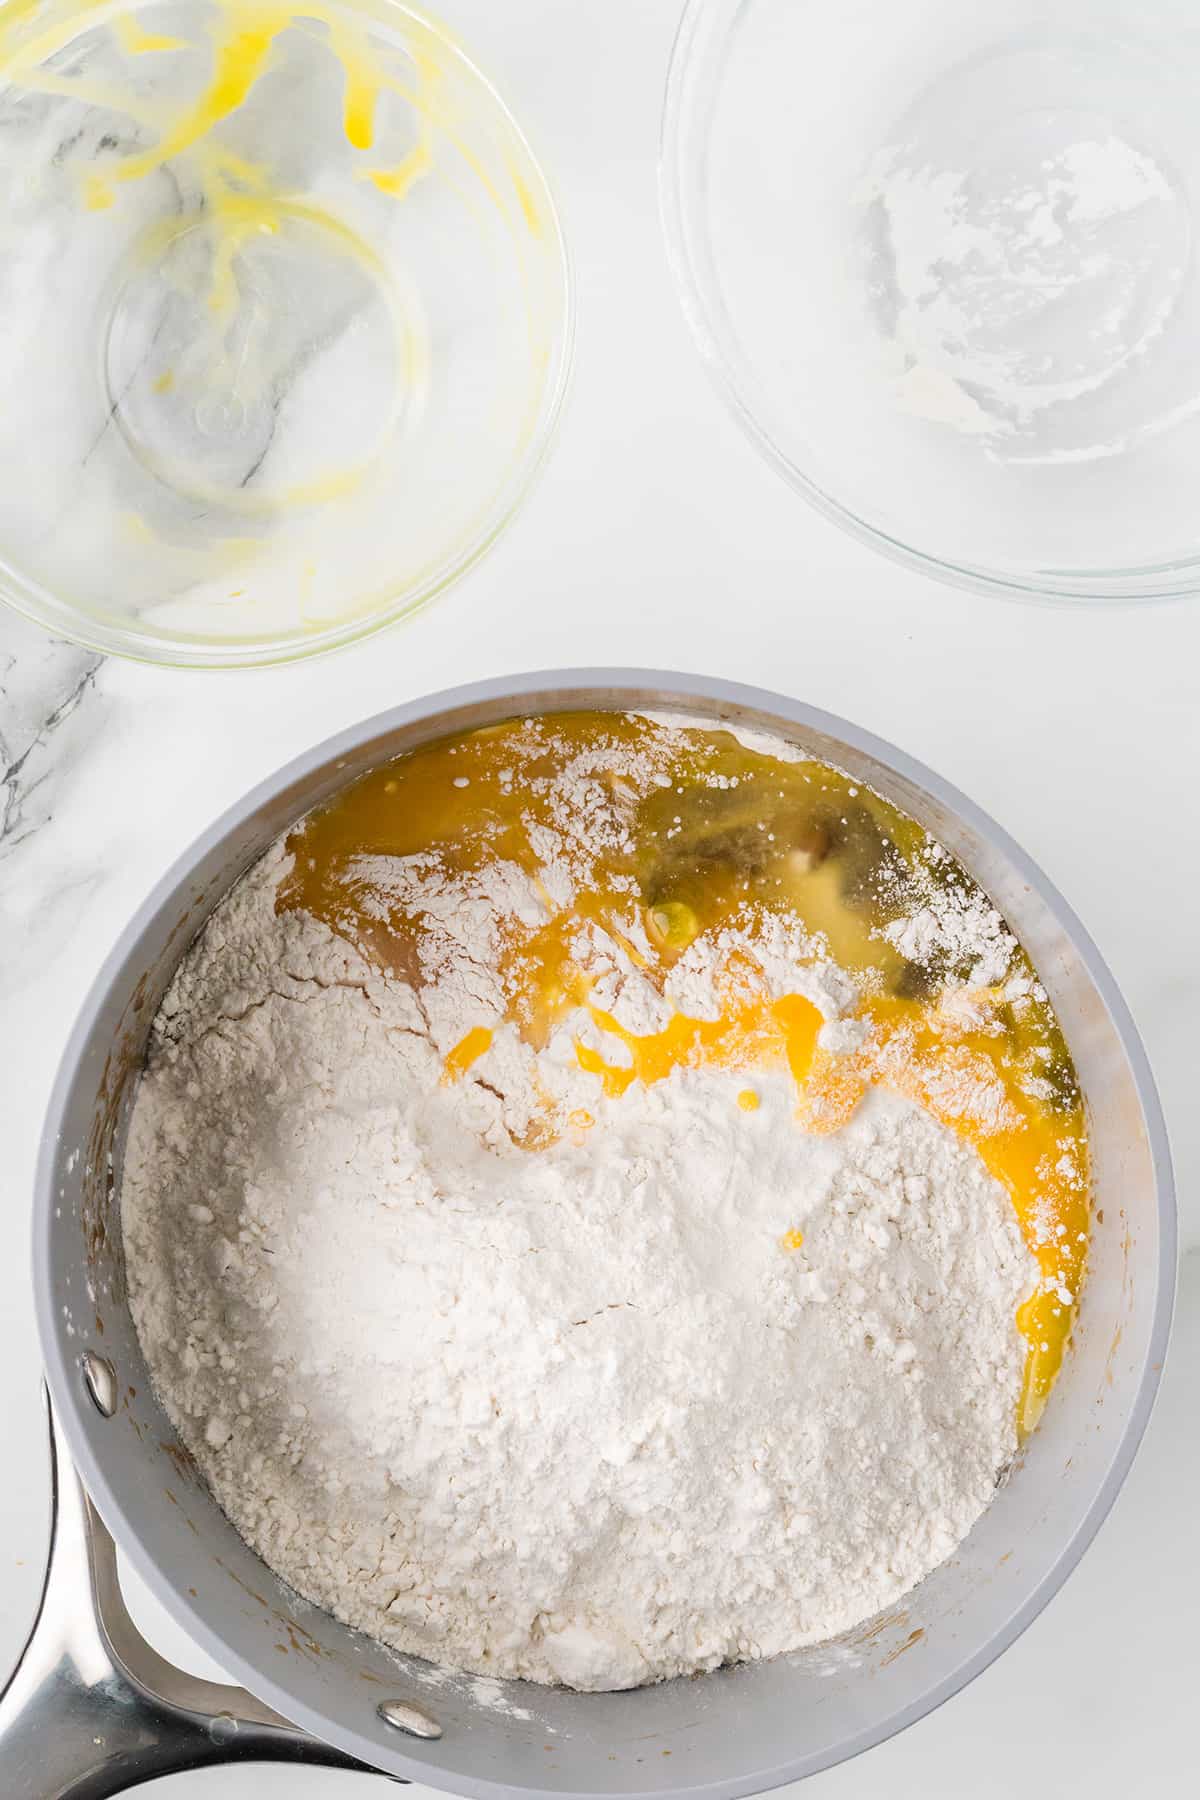 Flour and eggs added to boiled ingredients.